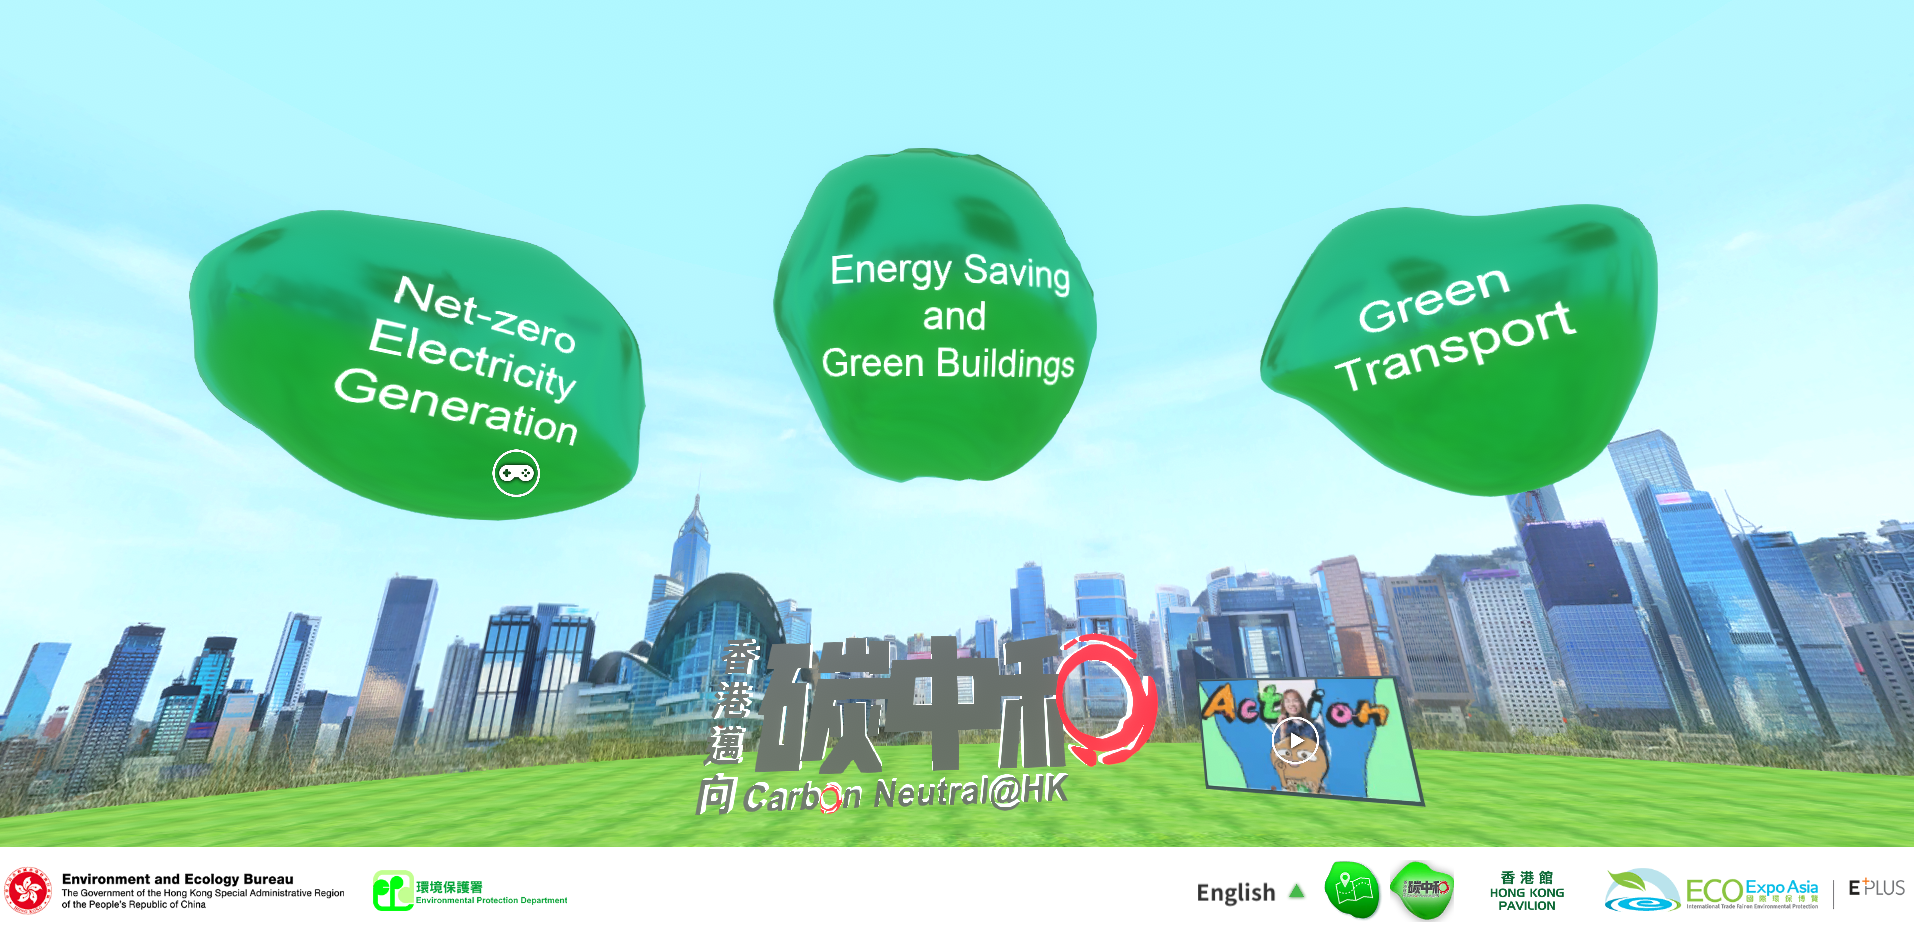 The virtual exhibition by the Environment and Ecology Bureau runs from today (December 14) to December 24. With guided virtual tour, the exhibition showcases Government’s efforts and achievements in promoting low-carbon transformation and low-carbon lifestyle to achieve carbon neutrality, as well as highlight the significance of smart technology in sustainable development.